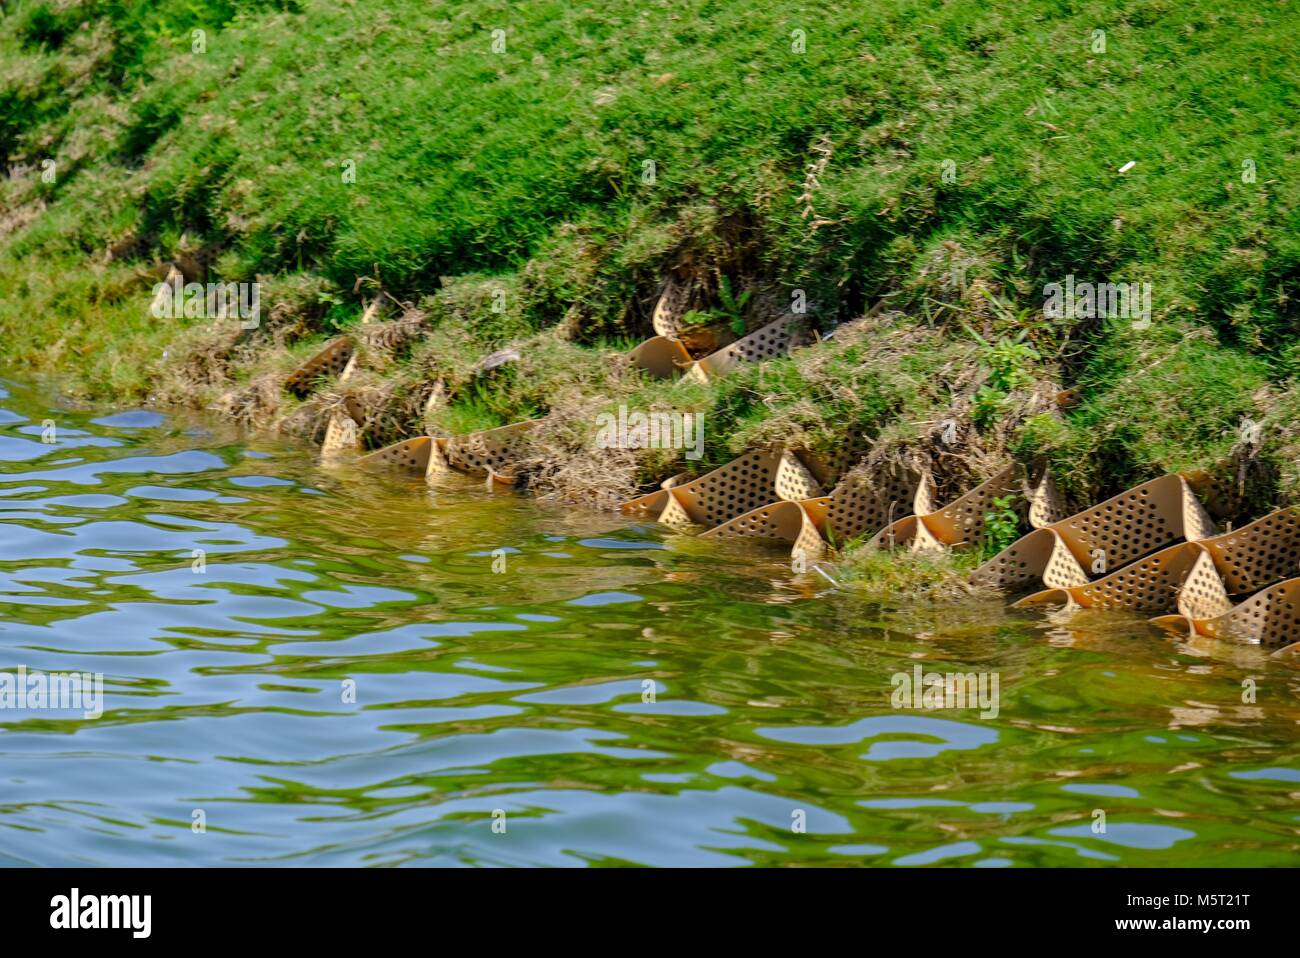 Saadiyat Island Abu Dhabi, UAE - 26th February, 2018: Artificial nesting for Egyptian Goose at Saadiyat Island. Egyptian Goose nests on ground, in tree holes or even the abandoned nests of other bird species. Credit: Fahd Khan/Alamy Live News. Stock Photo